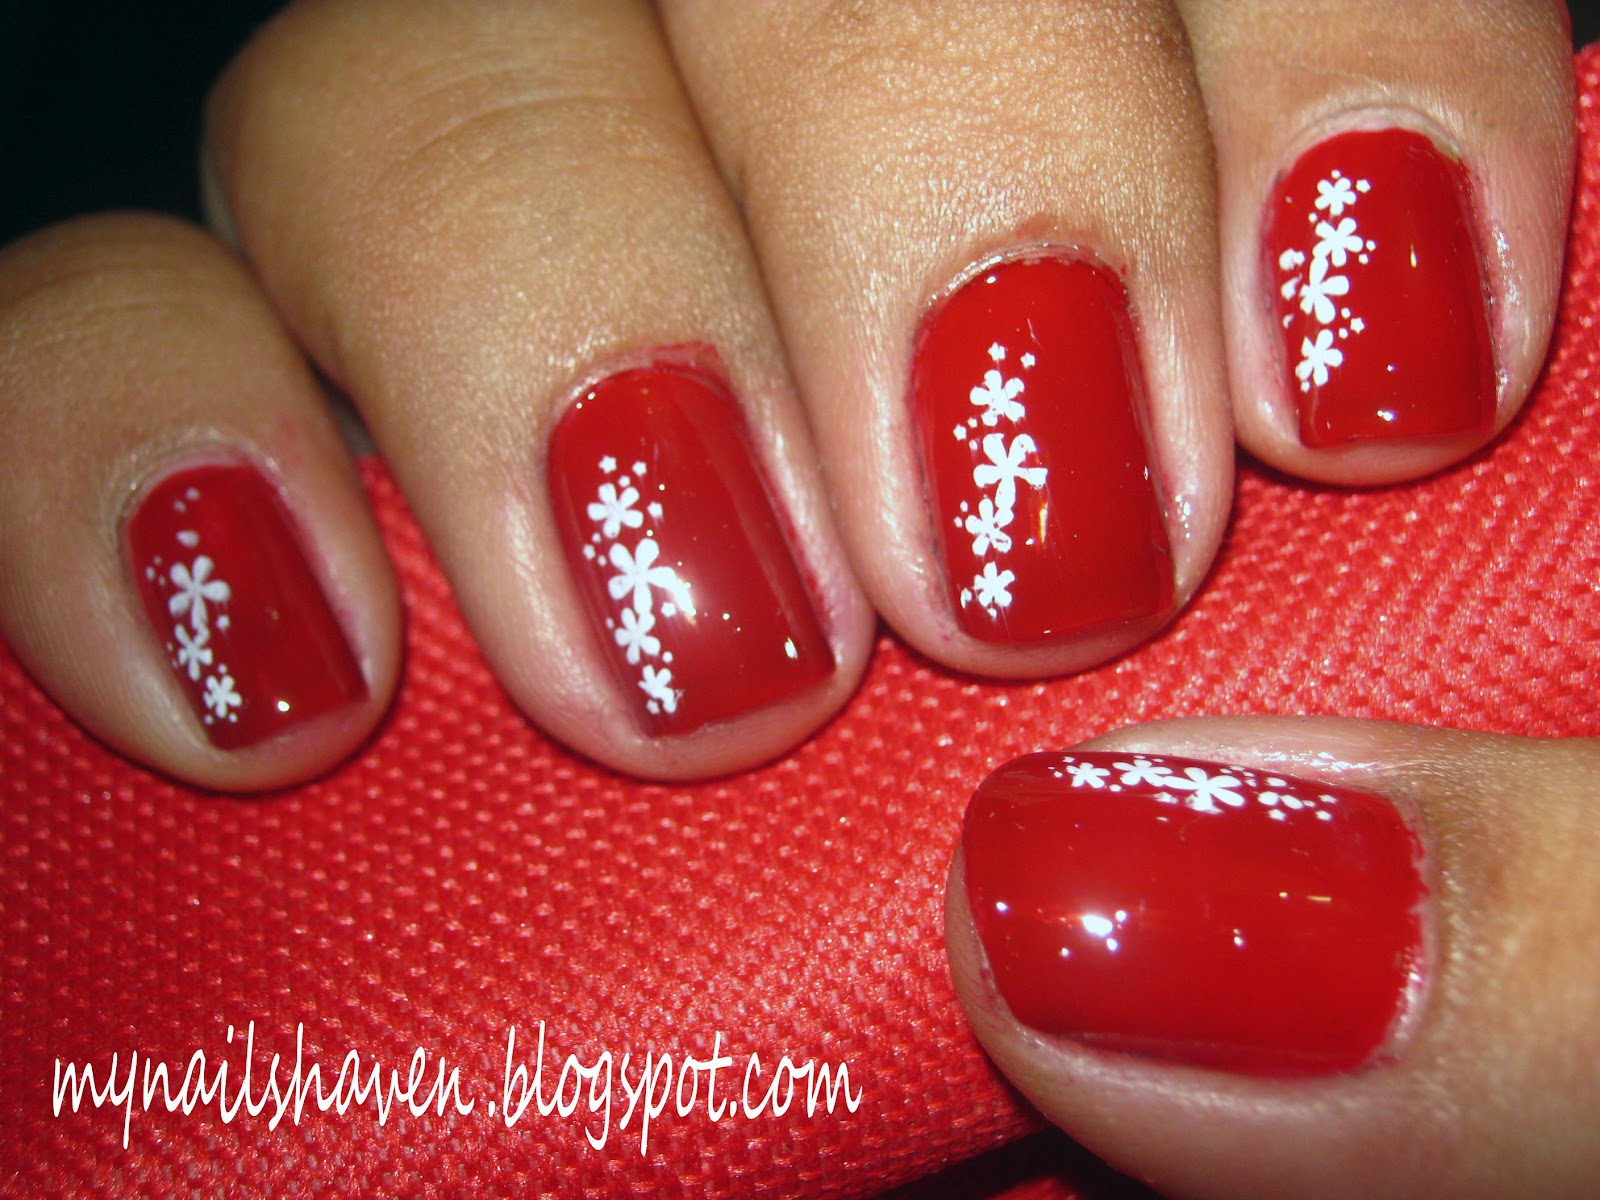 Red and White Polka Dot Nail Designs - wide 10